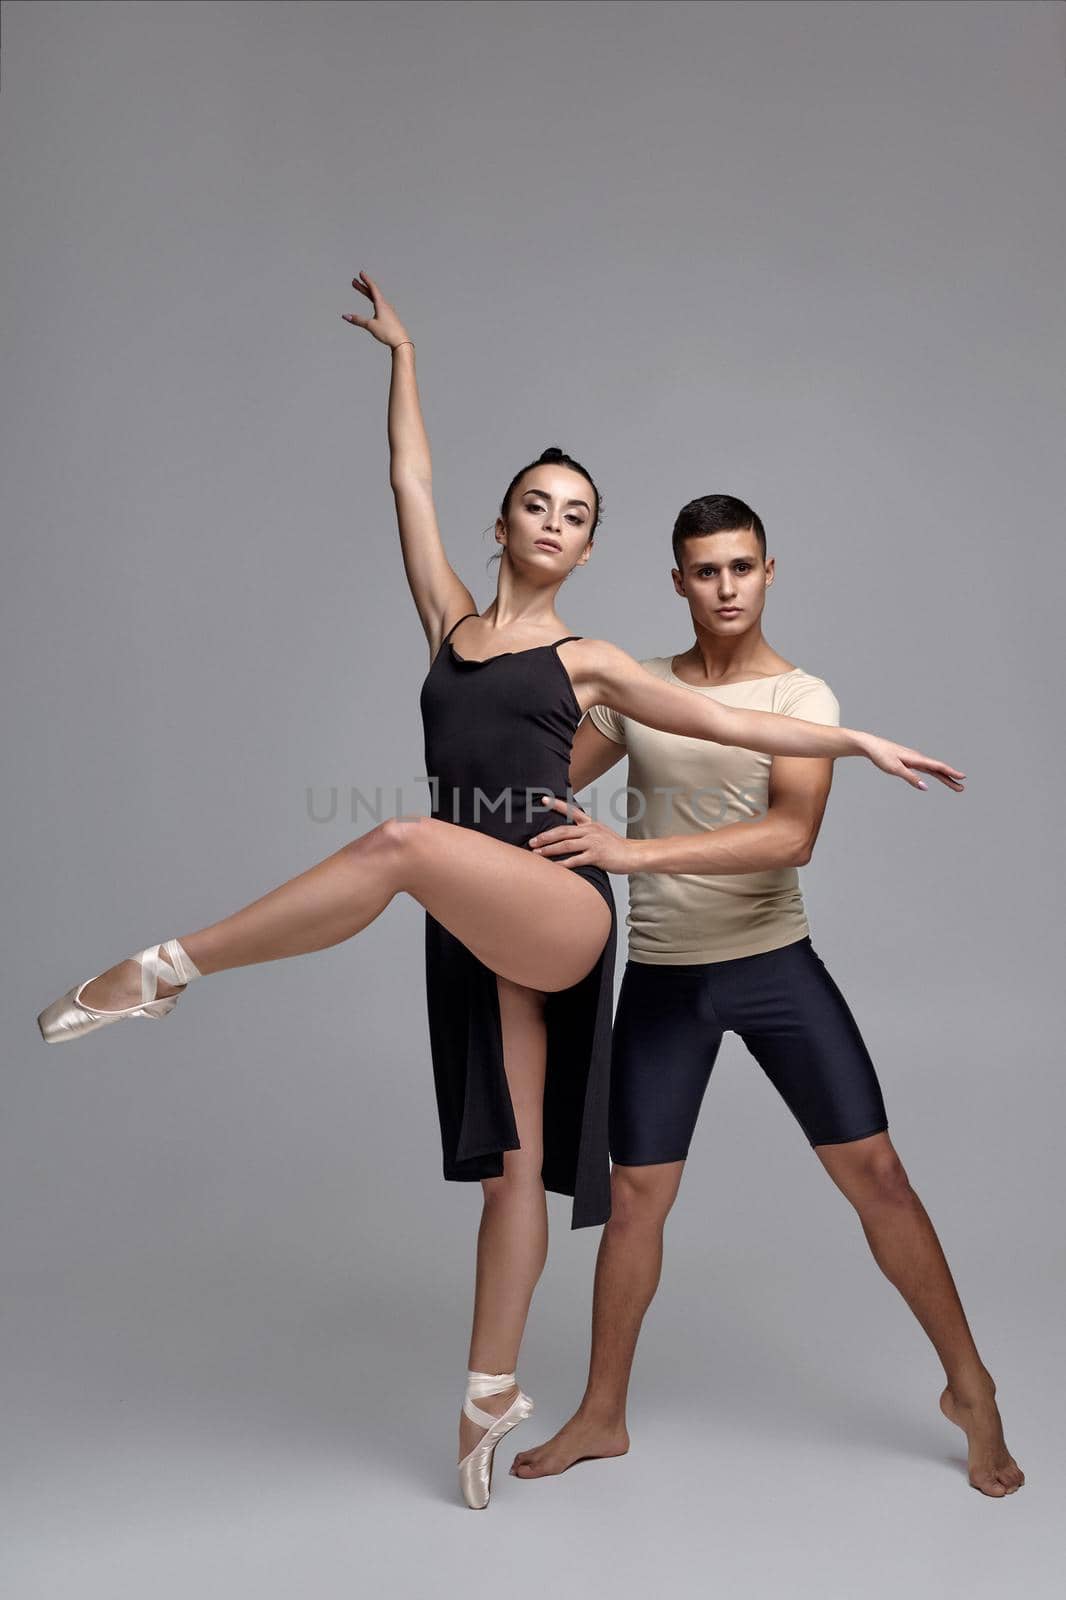 Pair of a graceful ballet dancers are posing over a gray studio background and looking at the camera. Handsome man in black shorts with beige t-shirt and beautiful woman in a black dress and white pointe shoes are dancing together. Ballet and contemporary choreography concept. Art photo.